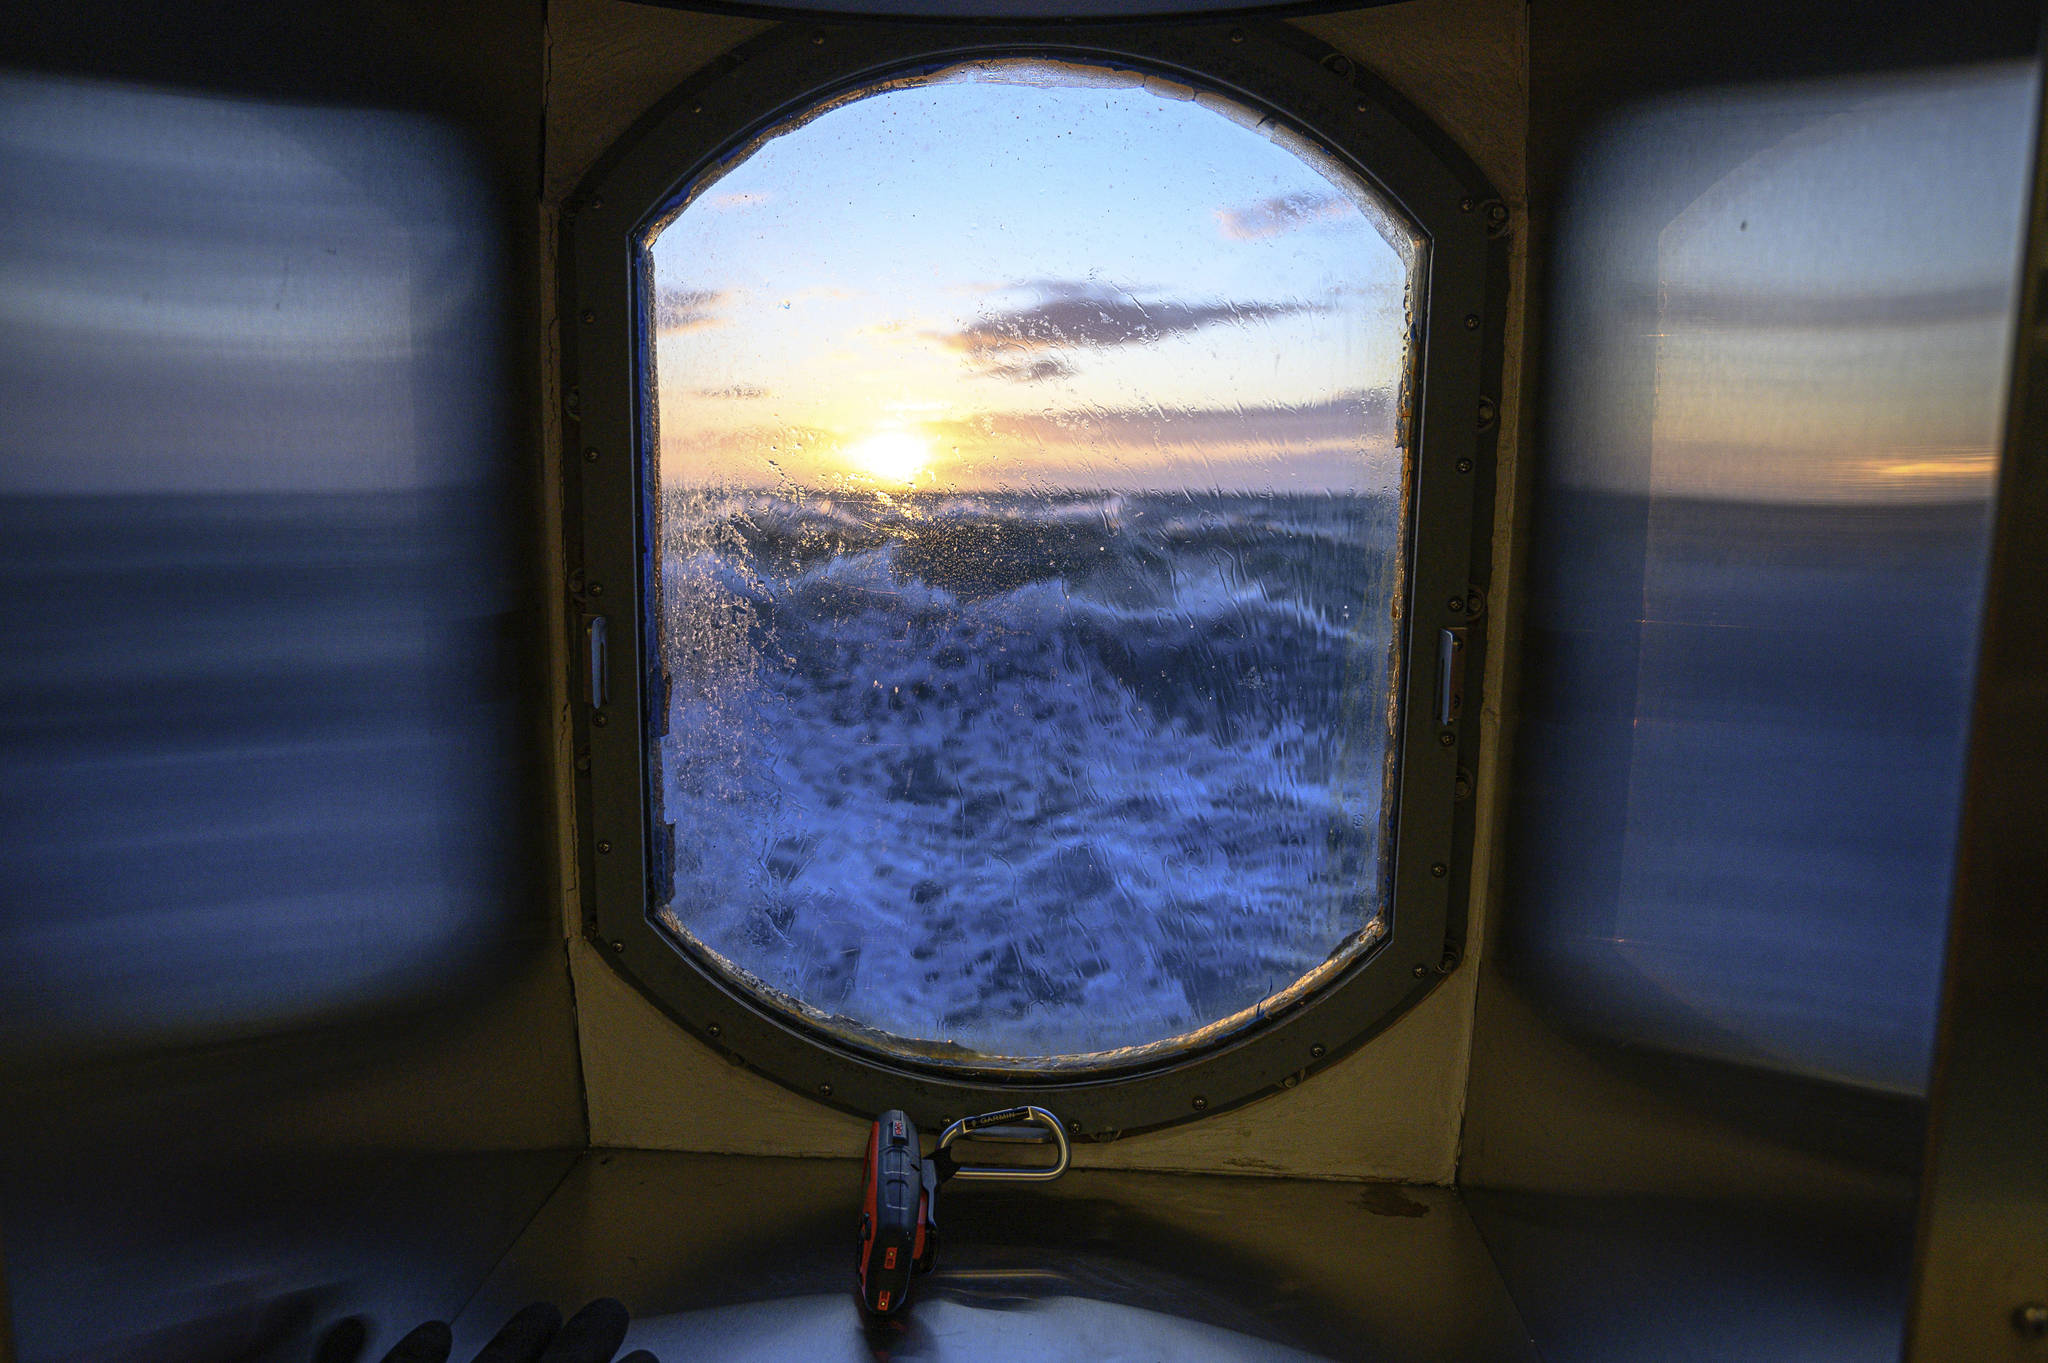 This Nov. 8, 2019, photo provided by John Guillote shows a view from the main lab of the Sikuliaq in the Chukchi Sea. University of Washington scientists onboard the research vessel are studying the changes and how less sea ice will affect coastlines, which already are vulnerable to erosion because increased waves delivered by storms. More erosion would increase the chance of winter flooding in villages and danger to hunters in small boats. (John Guillote via AP)